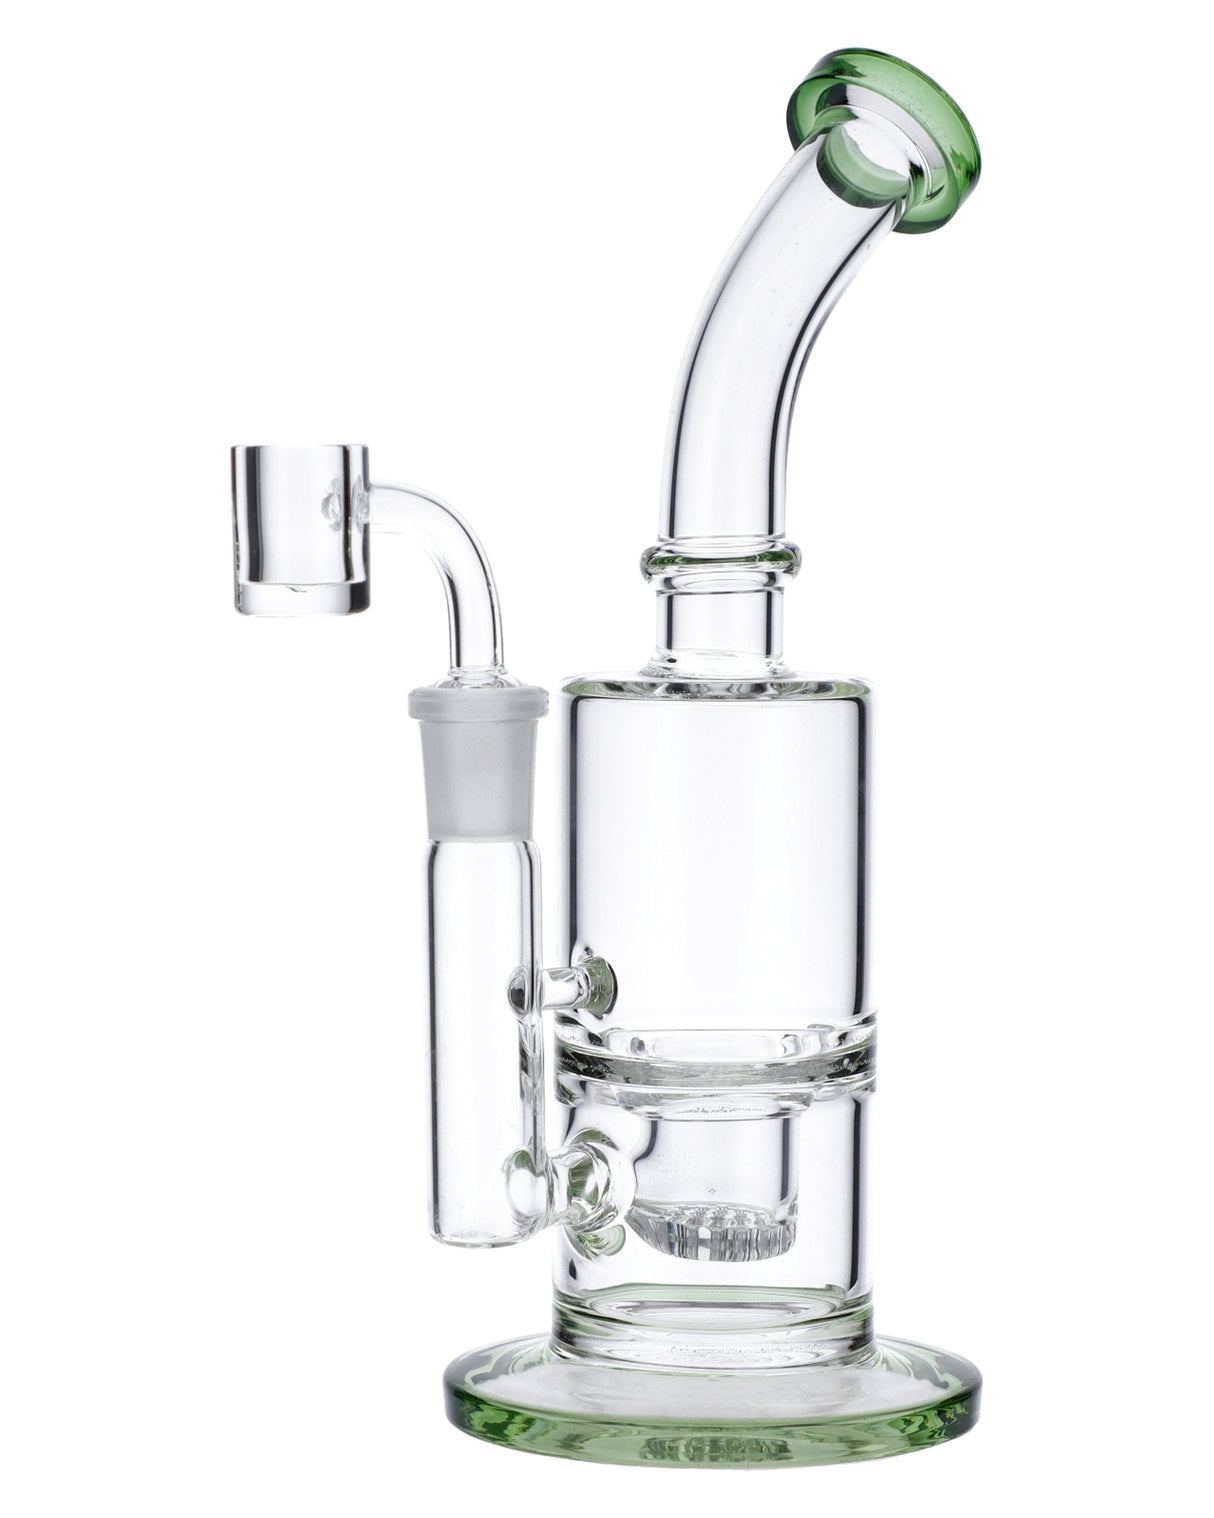 Valiant Distribution 8" Green Glass Bubbler Rig with Banger Hanger Design, Front View on White Background